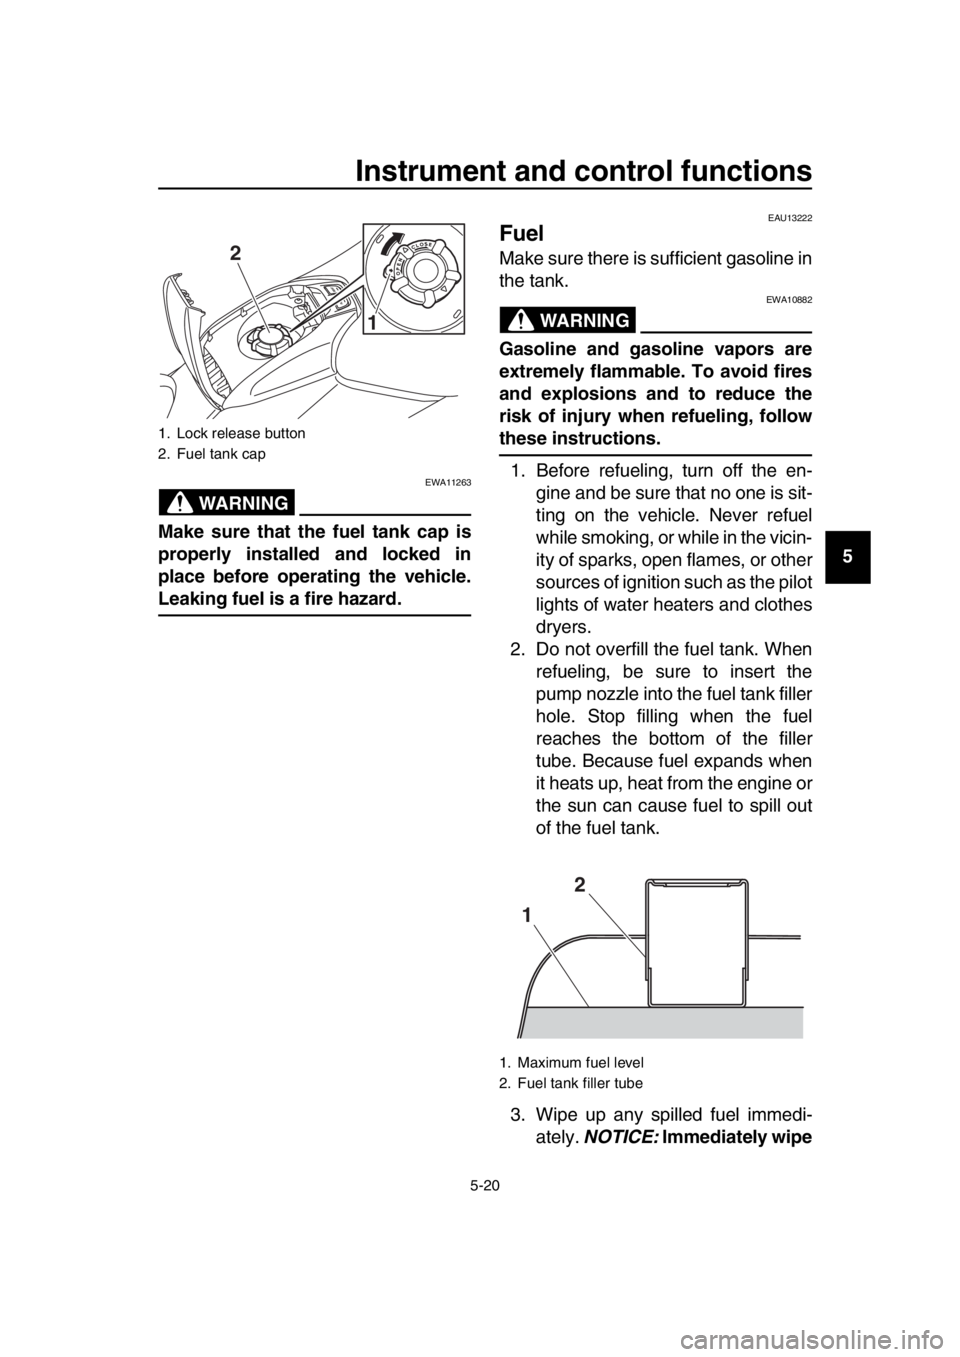 YAMAHA TMAX 2019  Owners Manual Instrument and control functions
5-20
1
2
3
4
5
6
7
8
9
10
11
12
13
14
WARNING
EWA11263
Make sure that the fuel tank cap is
properly installed and locked in
place before operating the vehicle.
Leaking